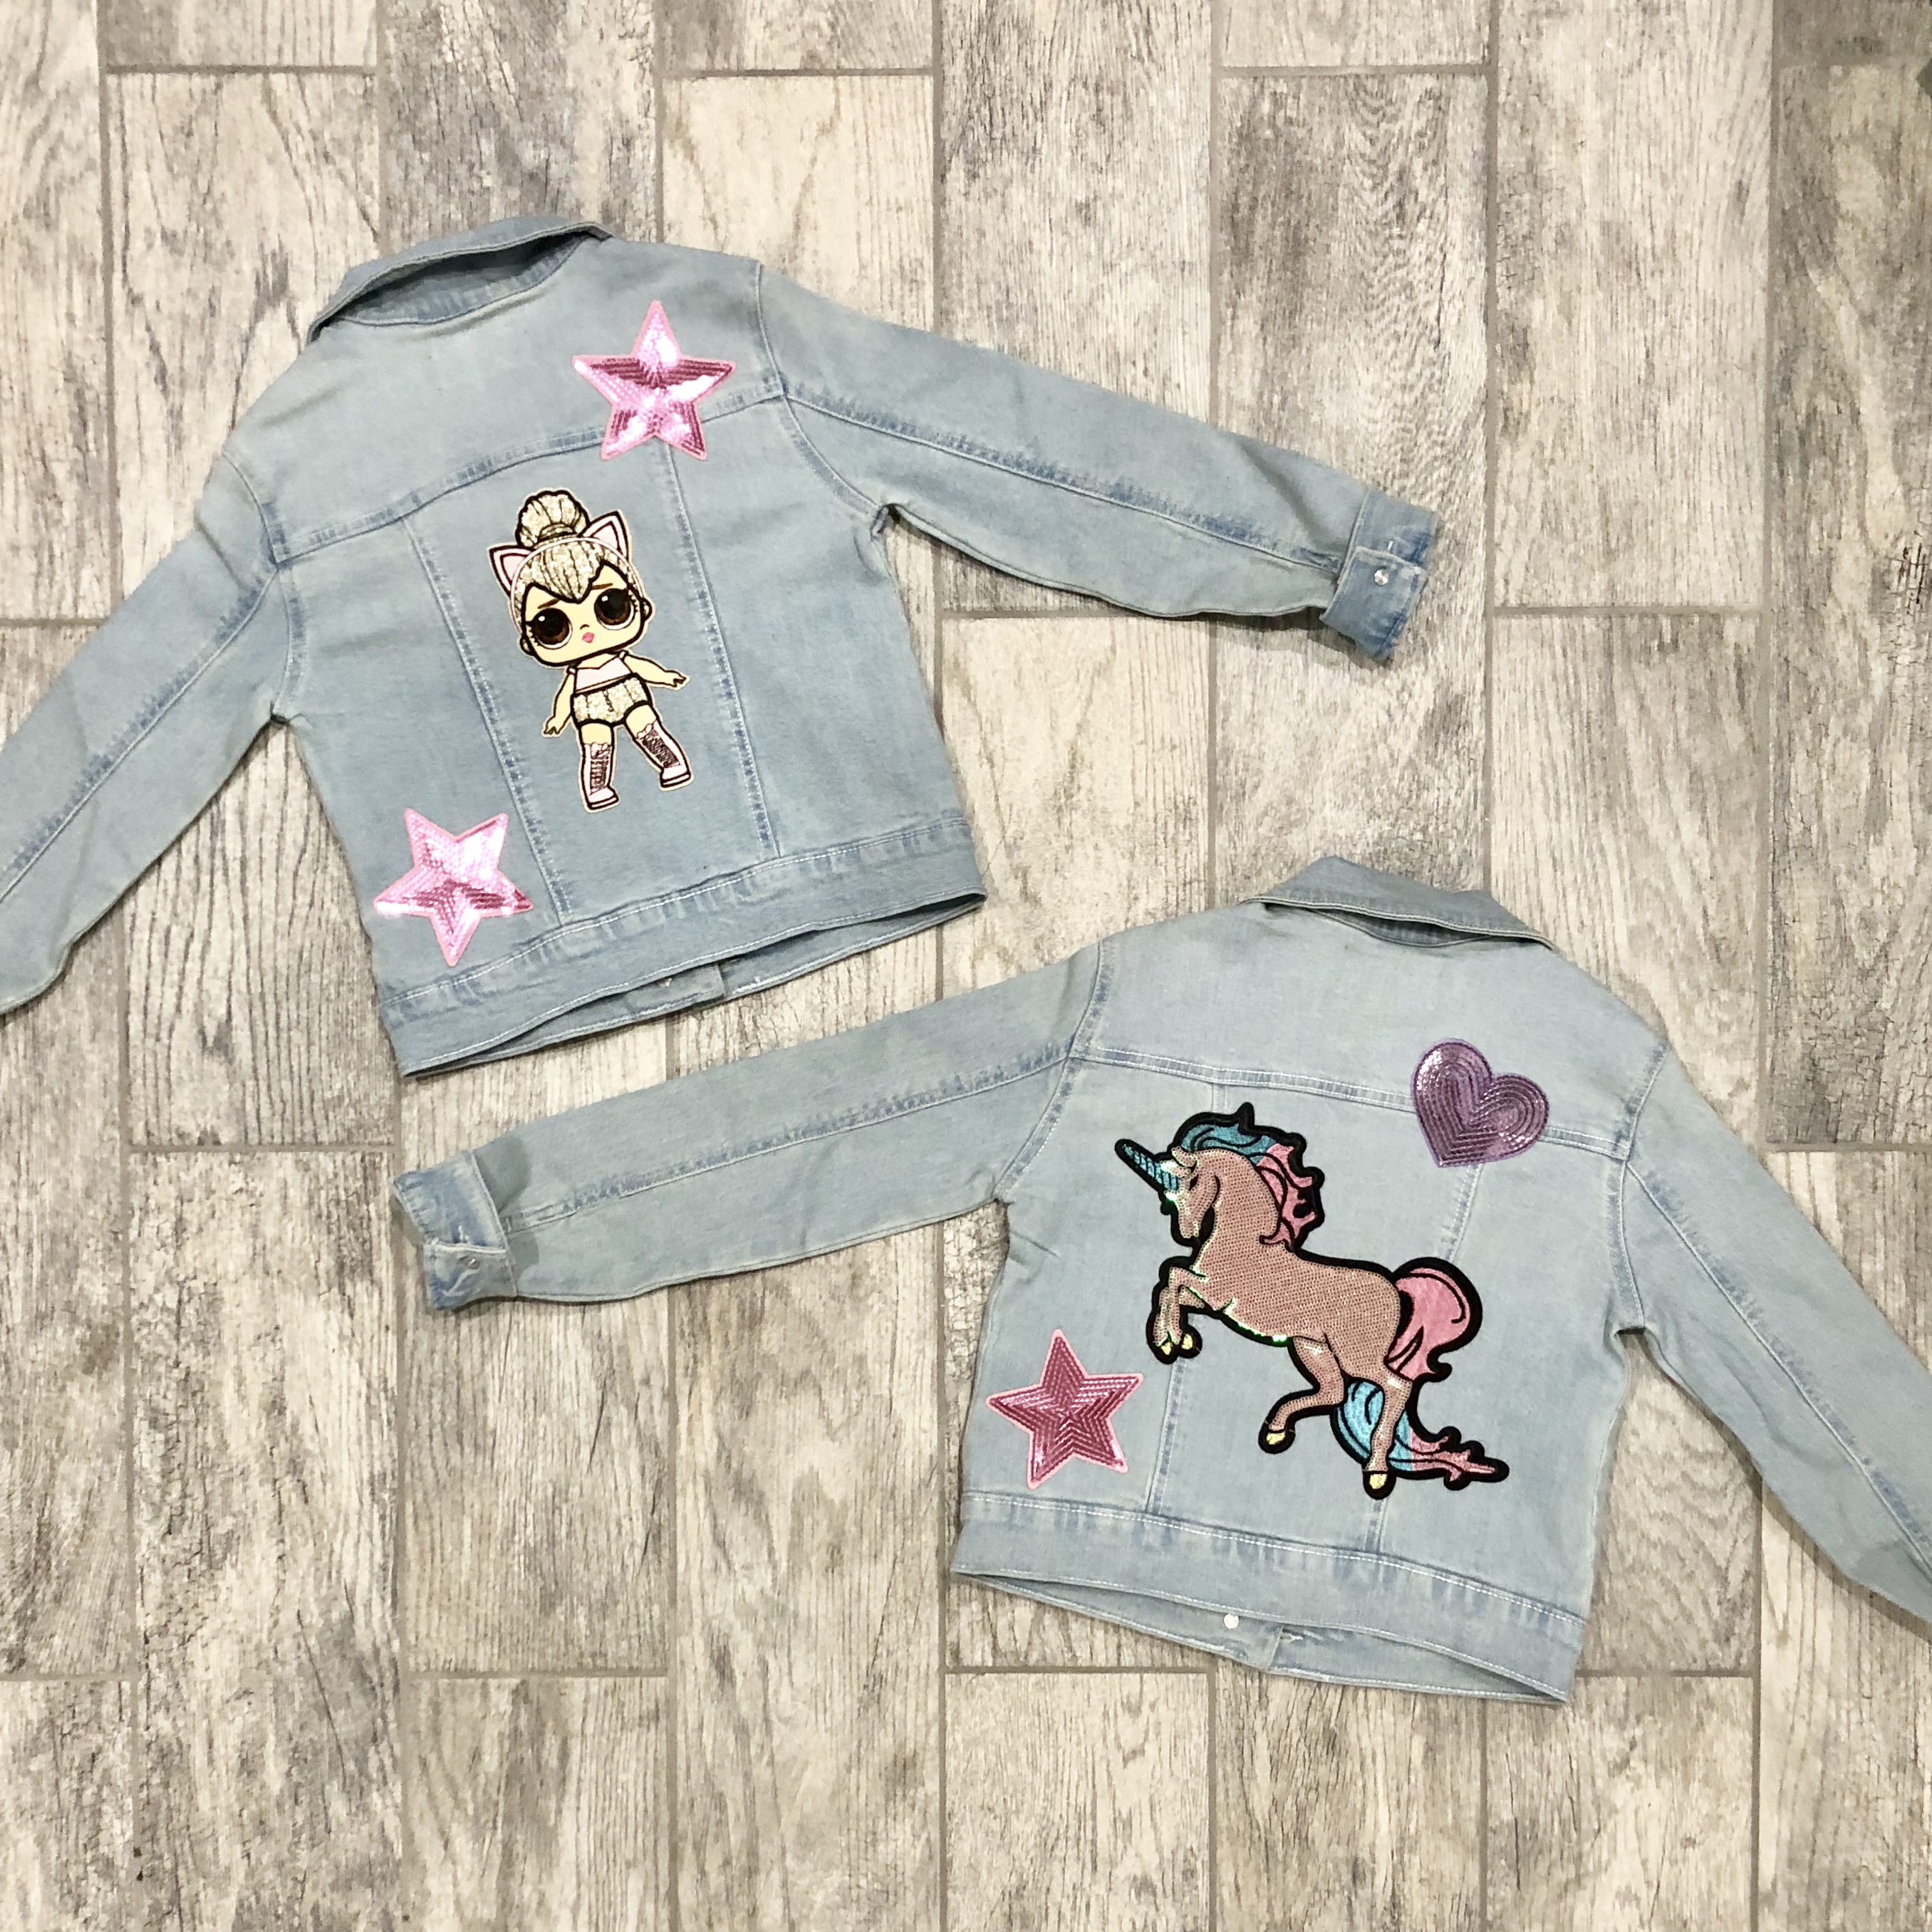 Girls Pink Letter Patch Jean Jacket Patches Bling me out Please Custom Jean Jacket Bling Ropa Ropa para niña Chaquetas y abrigos Rhinestones Name Patch Jacket Kids 